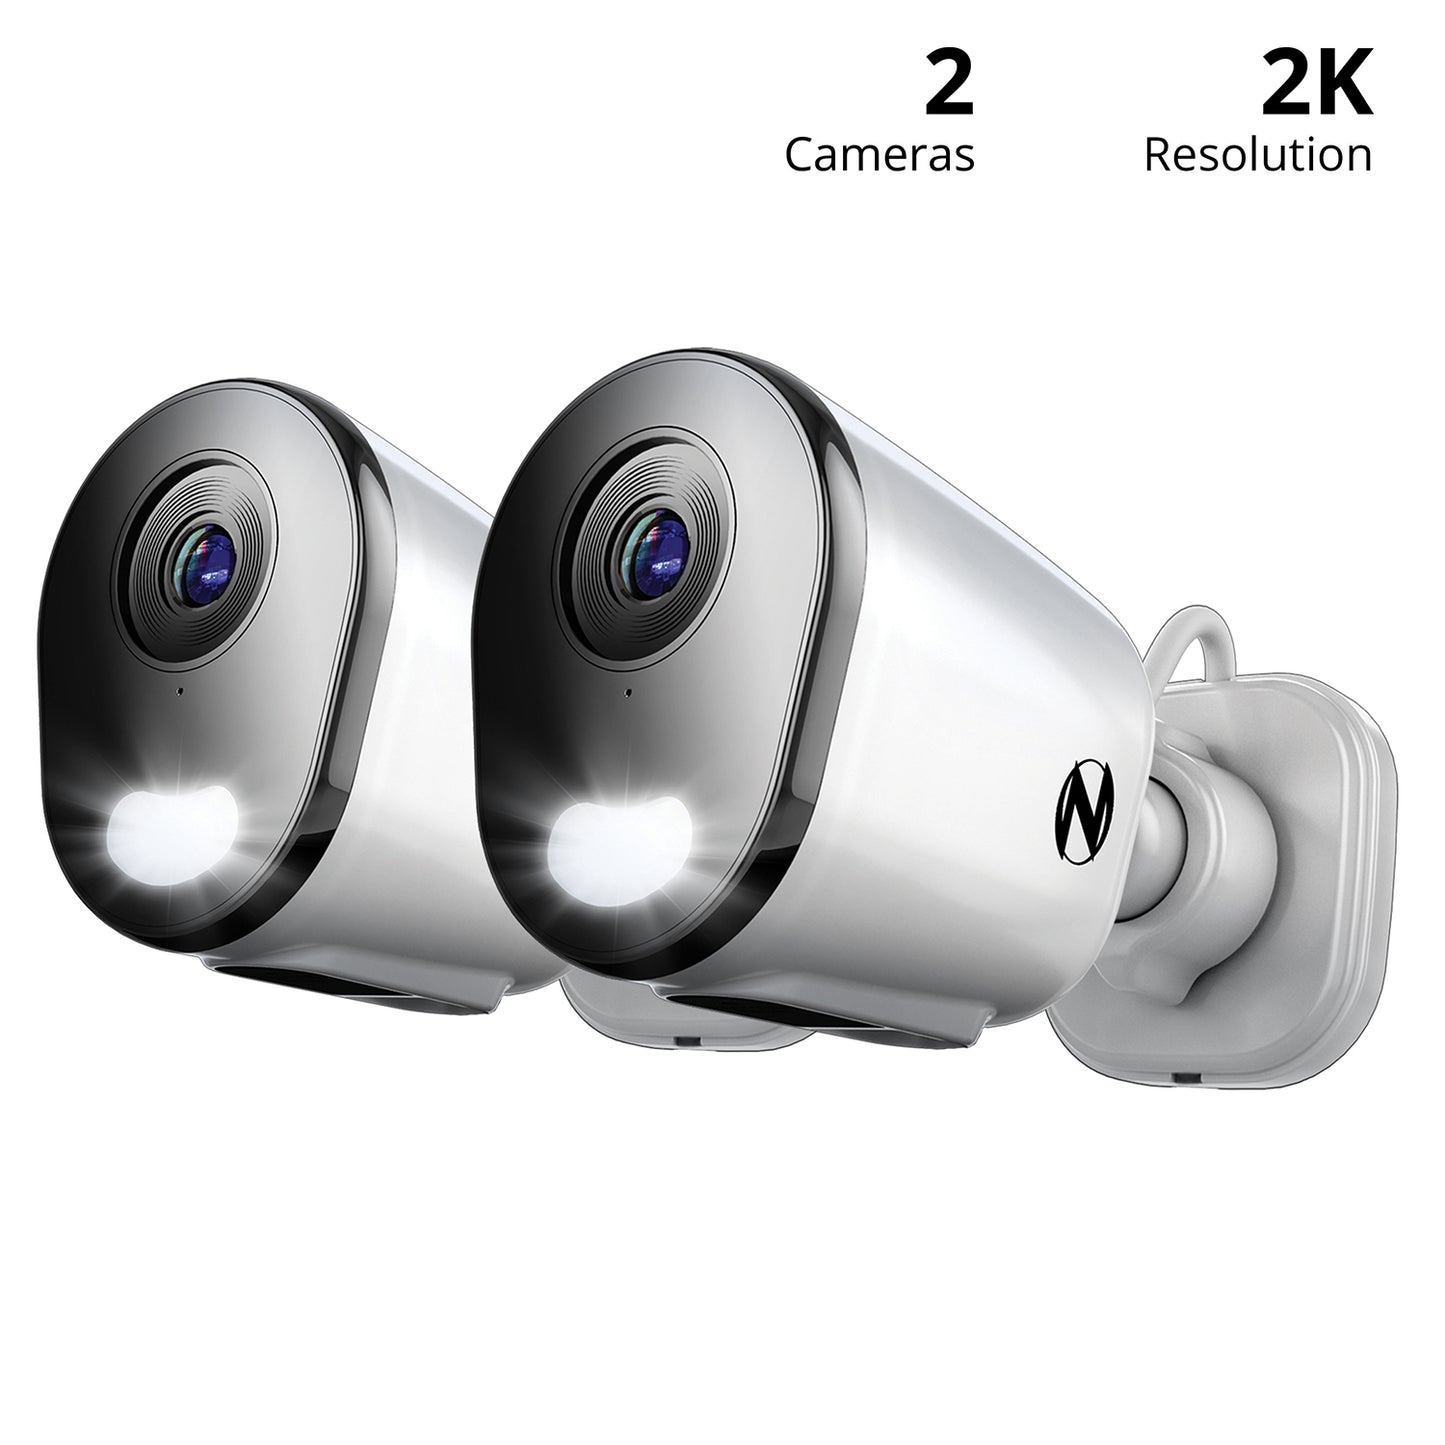 Wi-Fi IP Plug In 2K HD Deterrence Cameras with 2-Way Audio and Audio Alerts and Sirens - 2 Pack - White